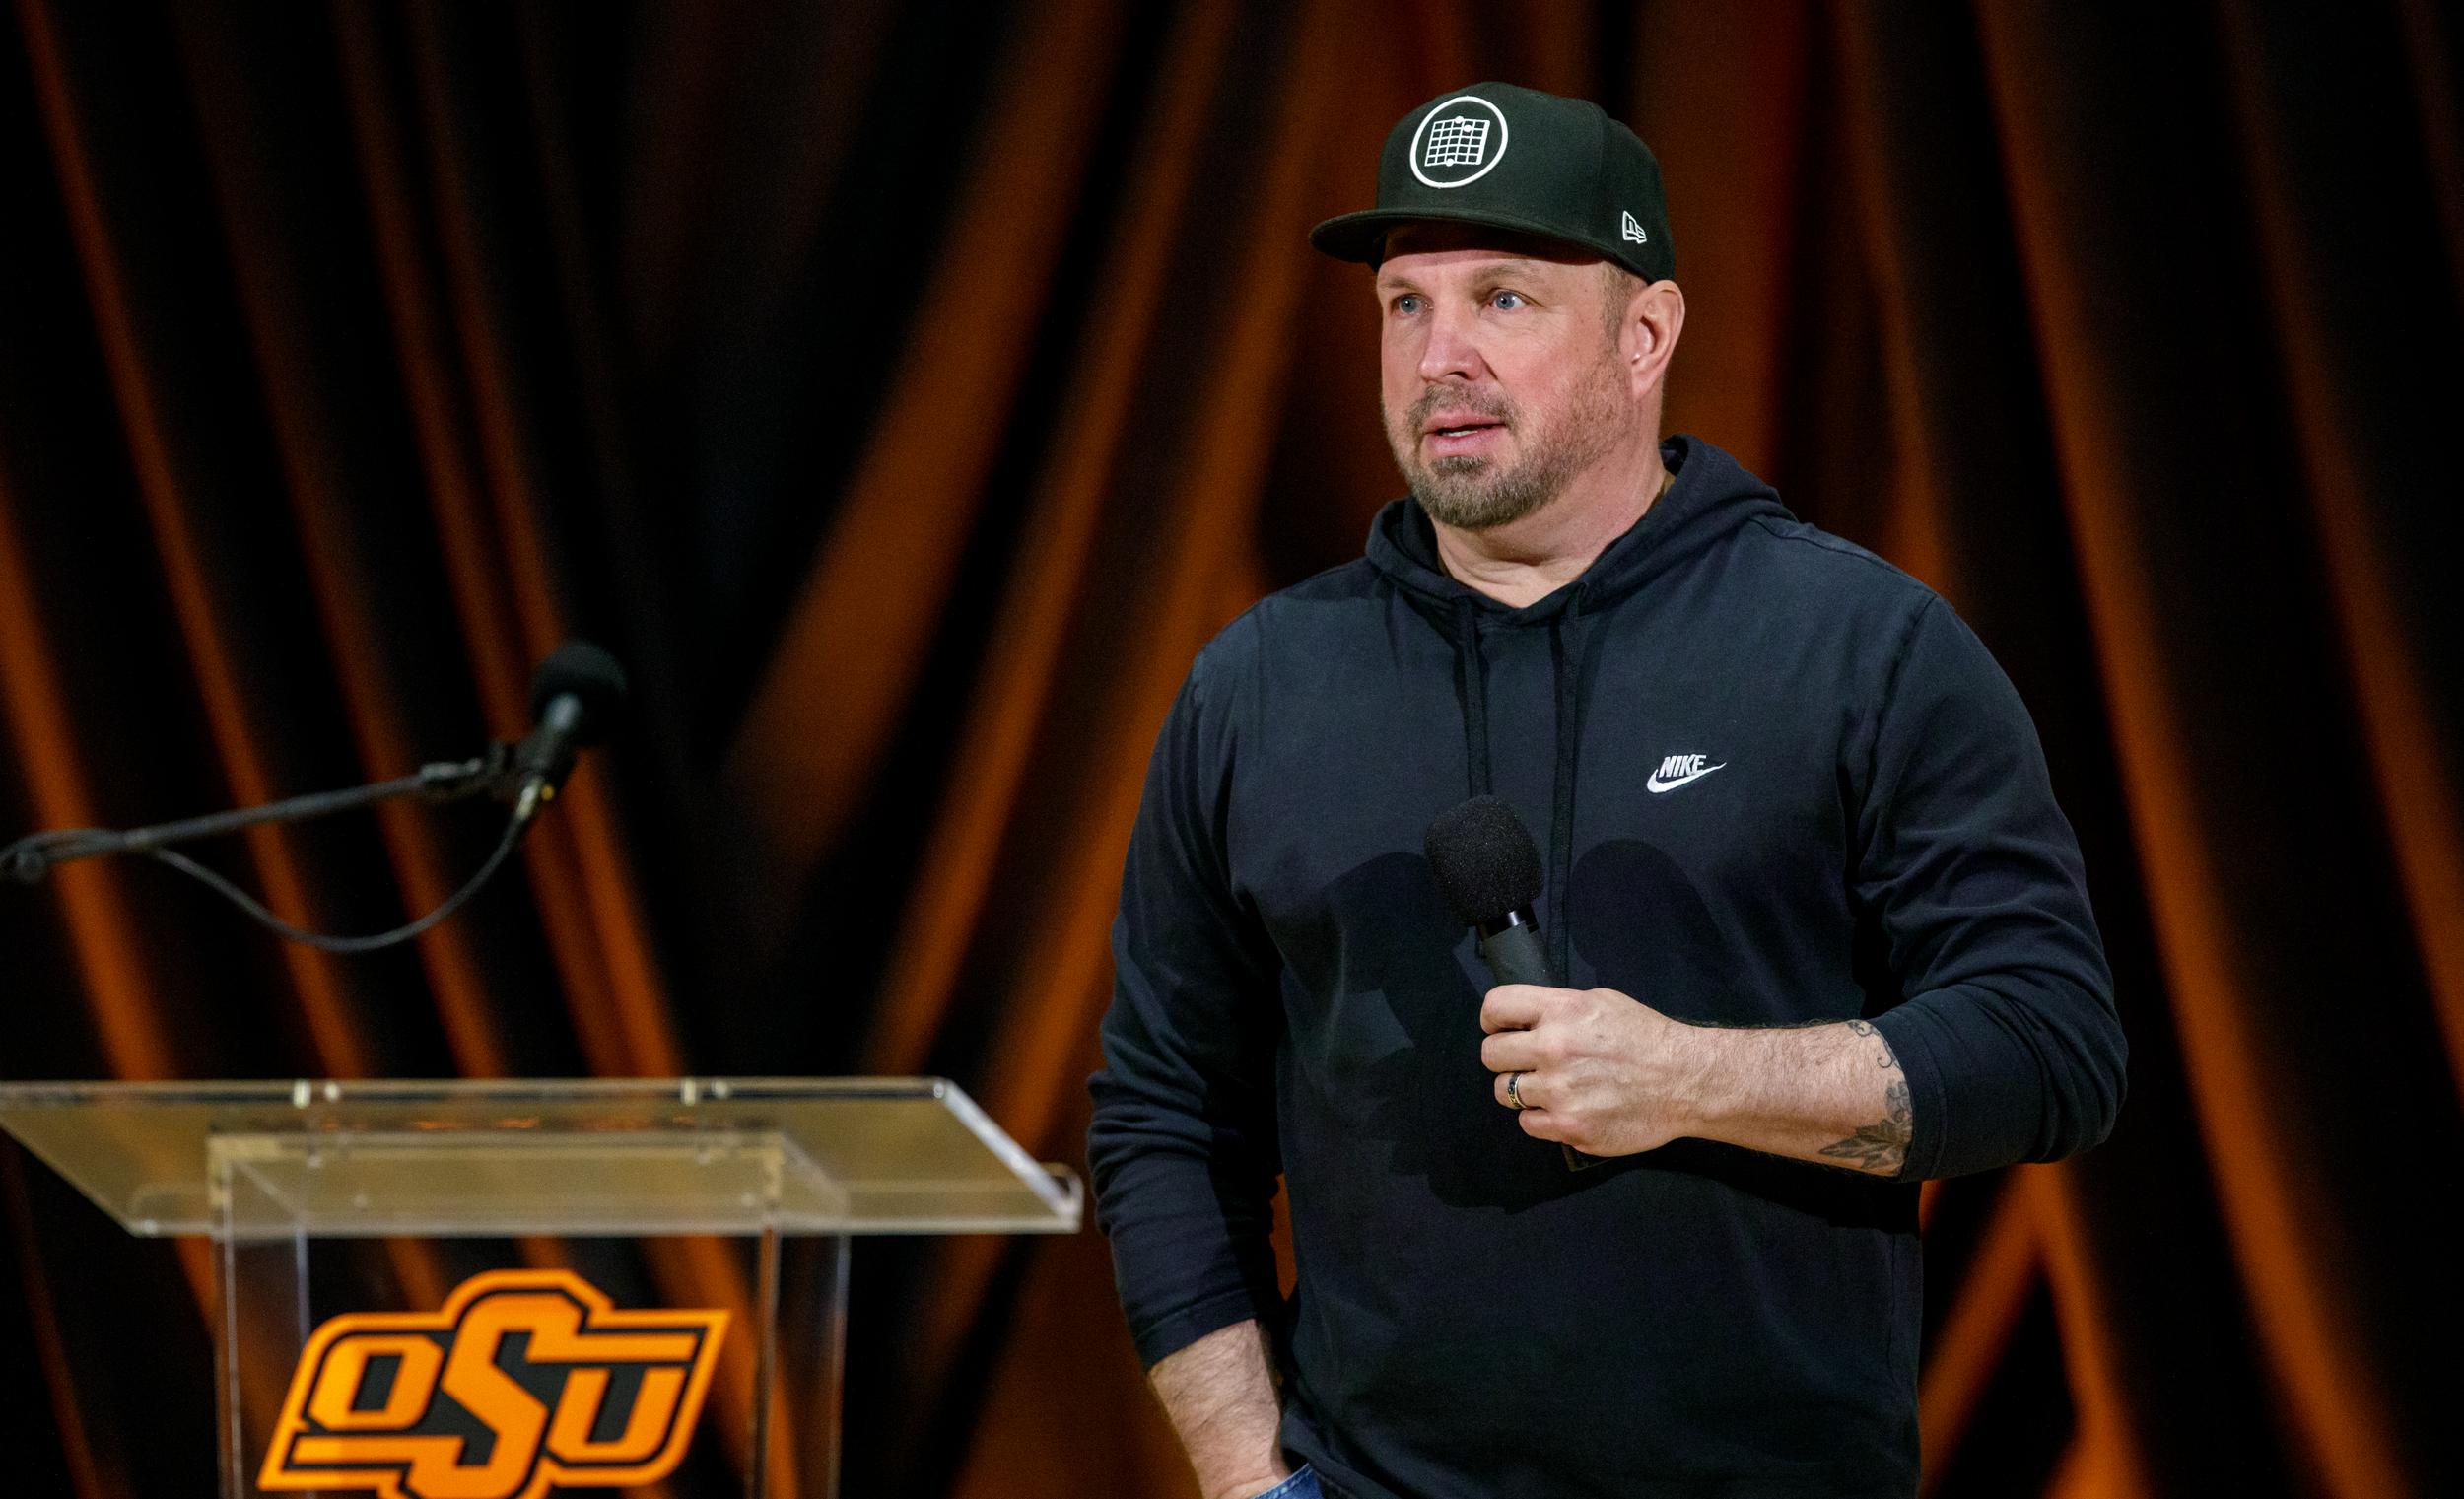 Garth Brooks stands with a microphone next to a lectern at a press conference